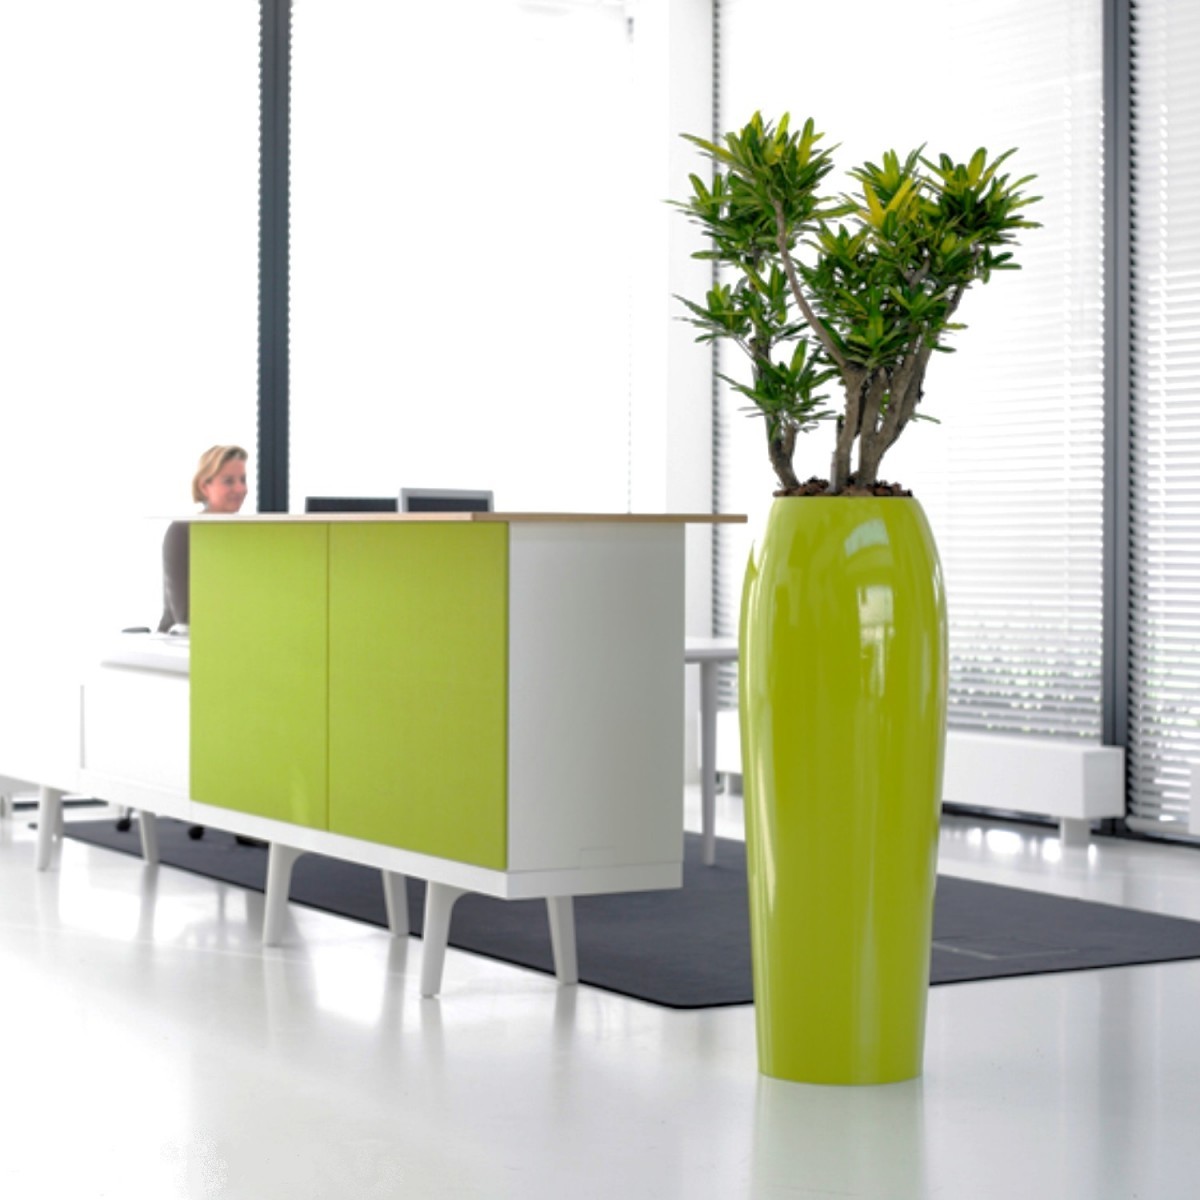 How Plants Can Help Boost Open Plan Working